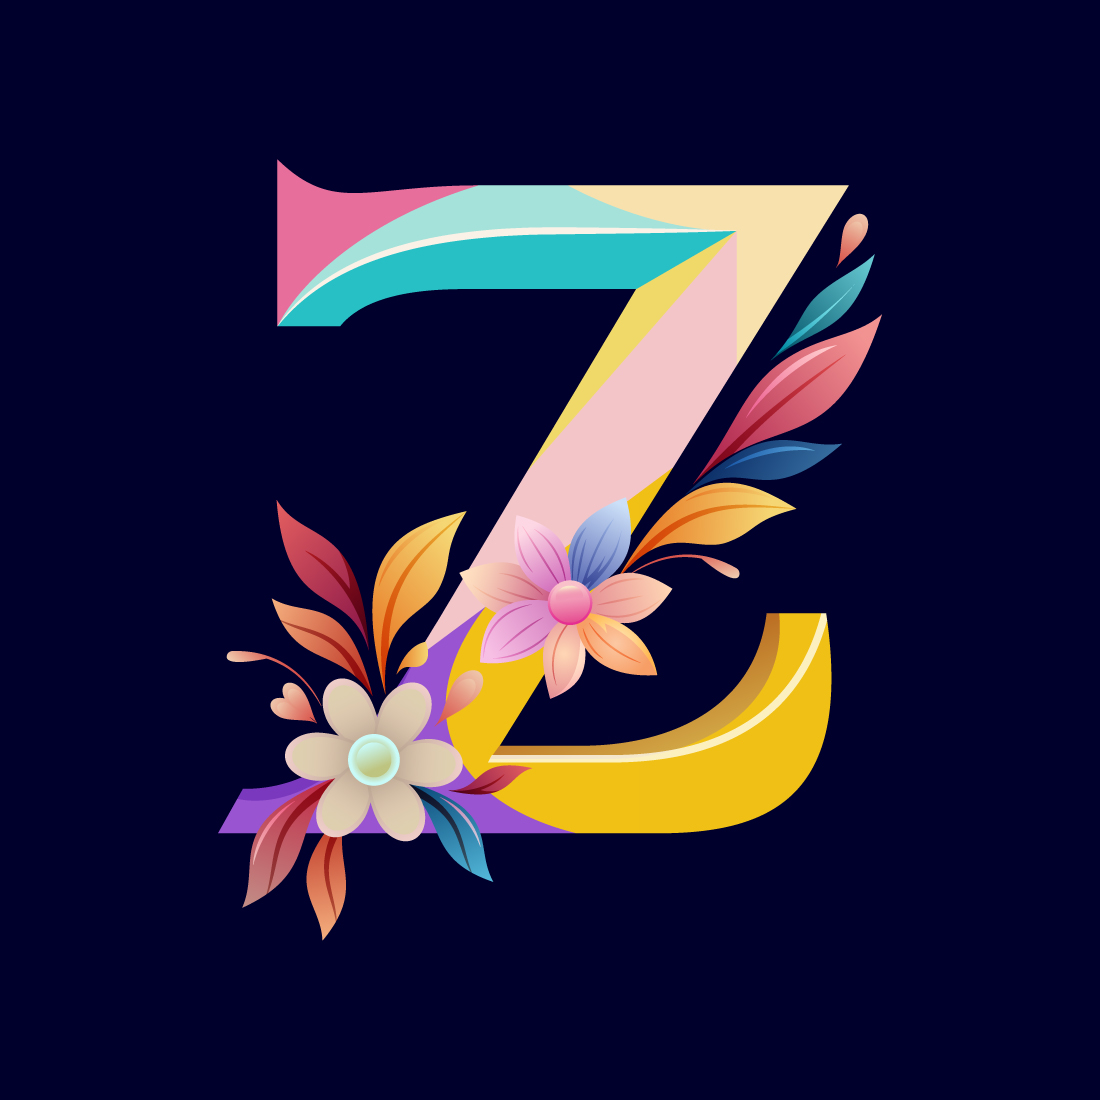 Floral alphabet Z Logo for wedding invitations, greeting card, birthday, logo, poster other ideas cover image.